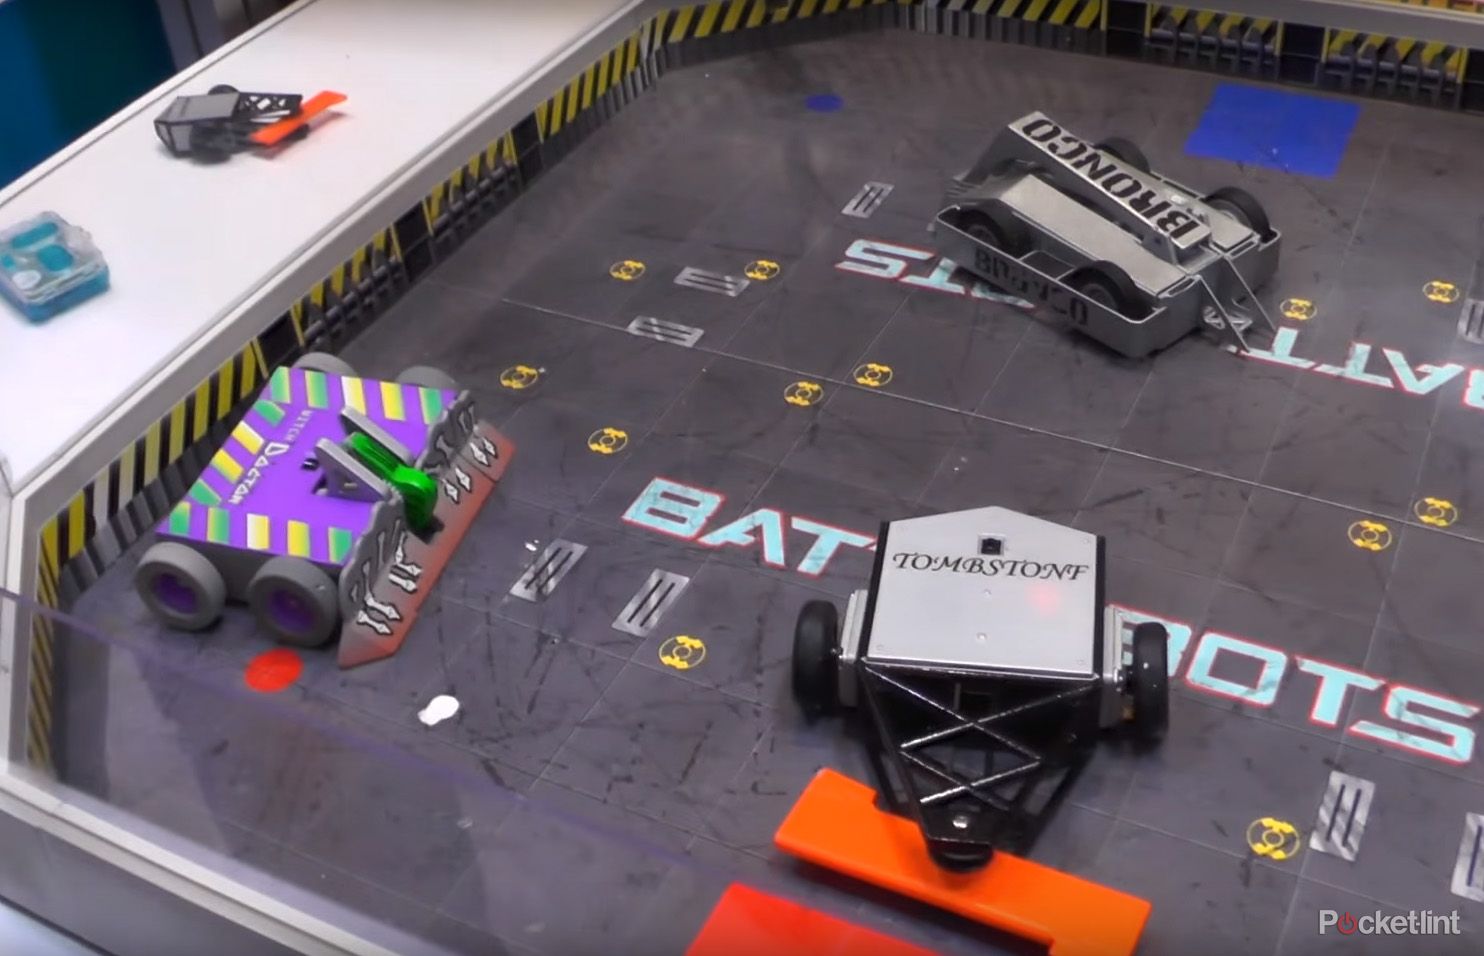 don t just watch bbc s robot wars fight your own hexbug battlebots at home image 1